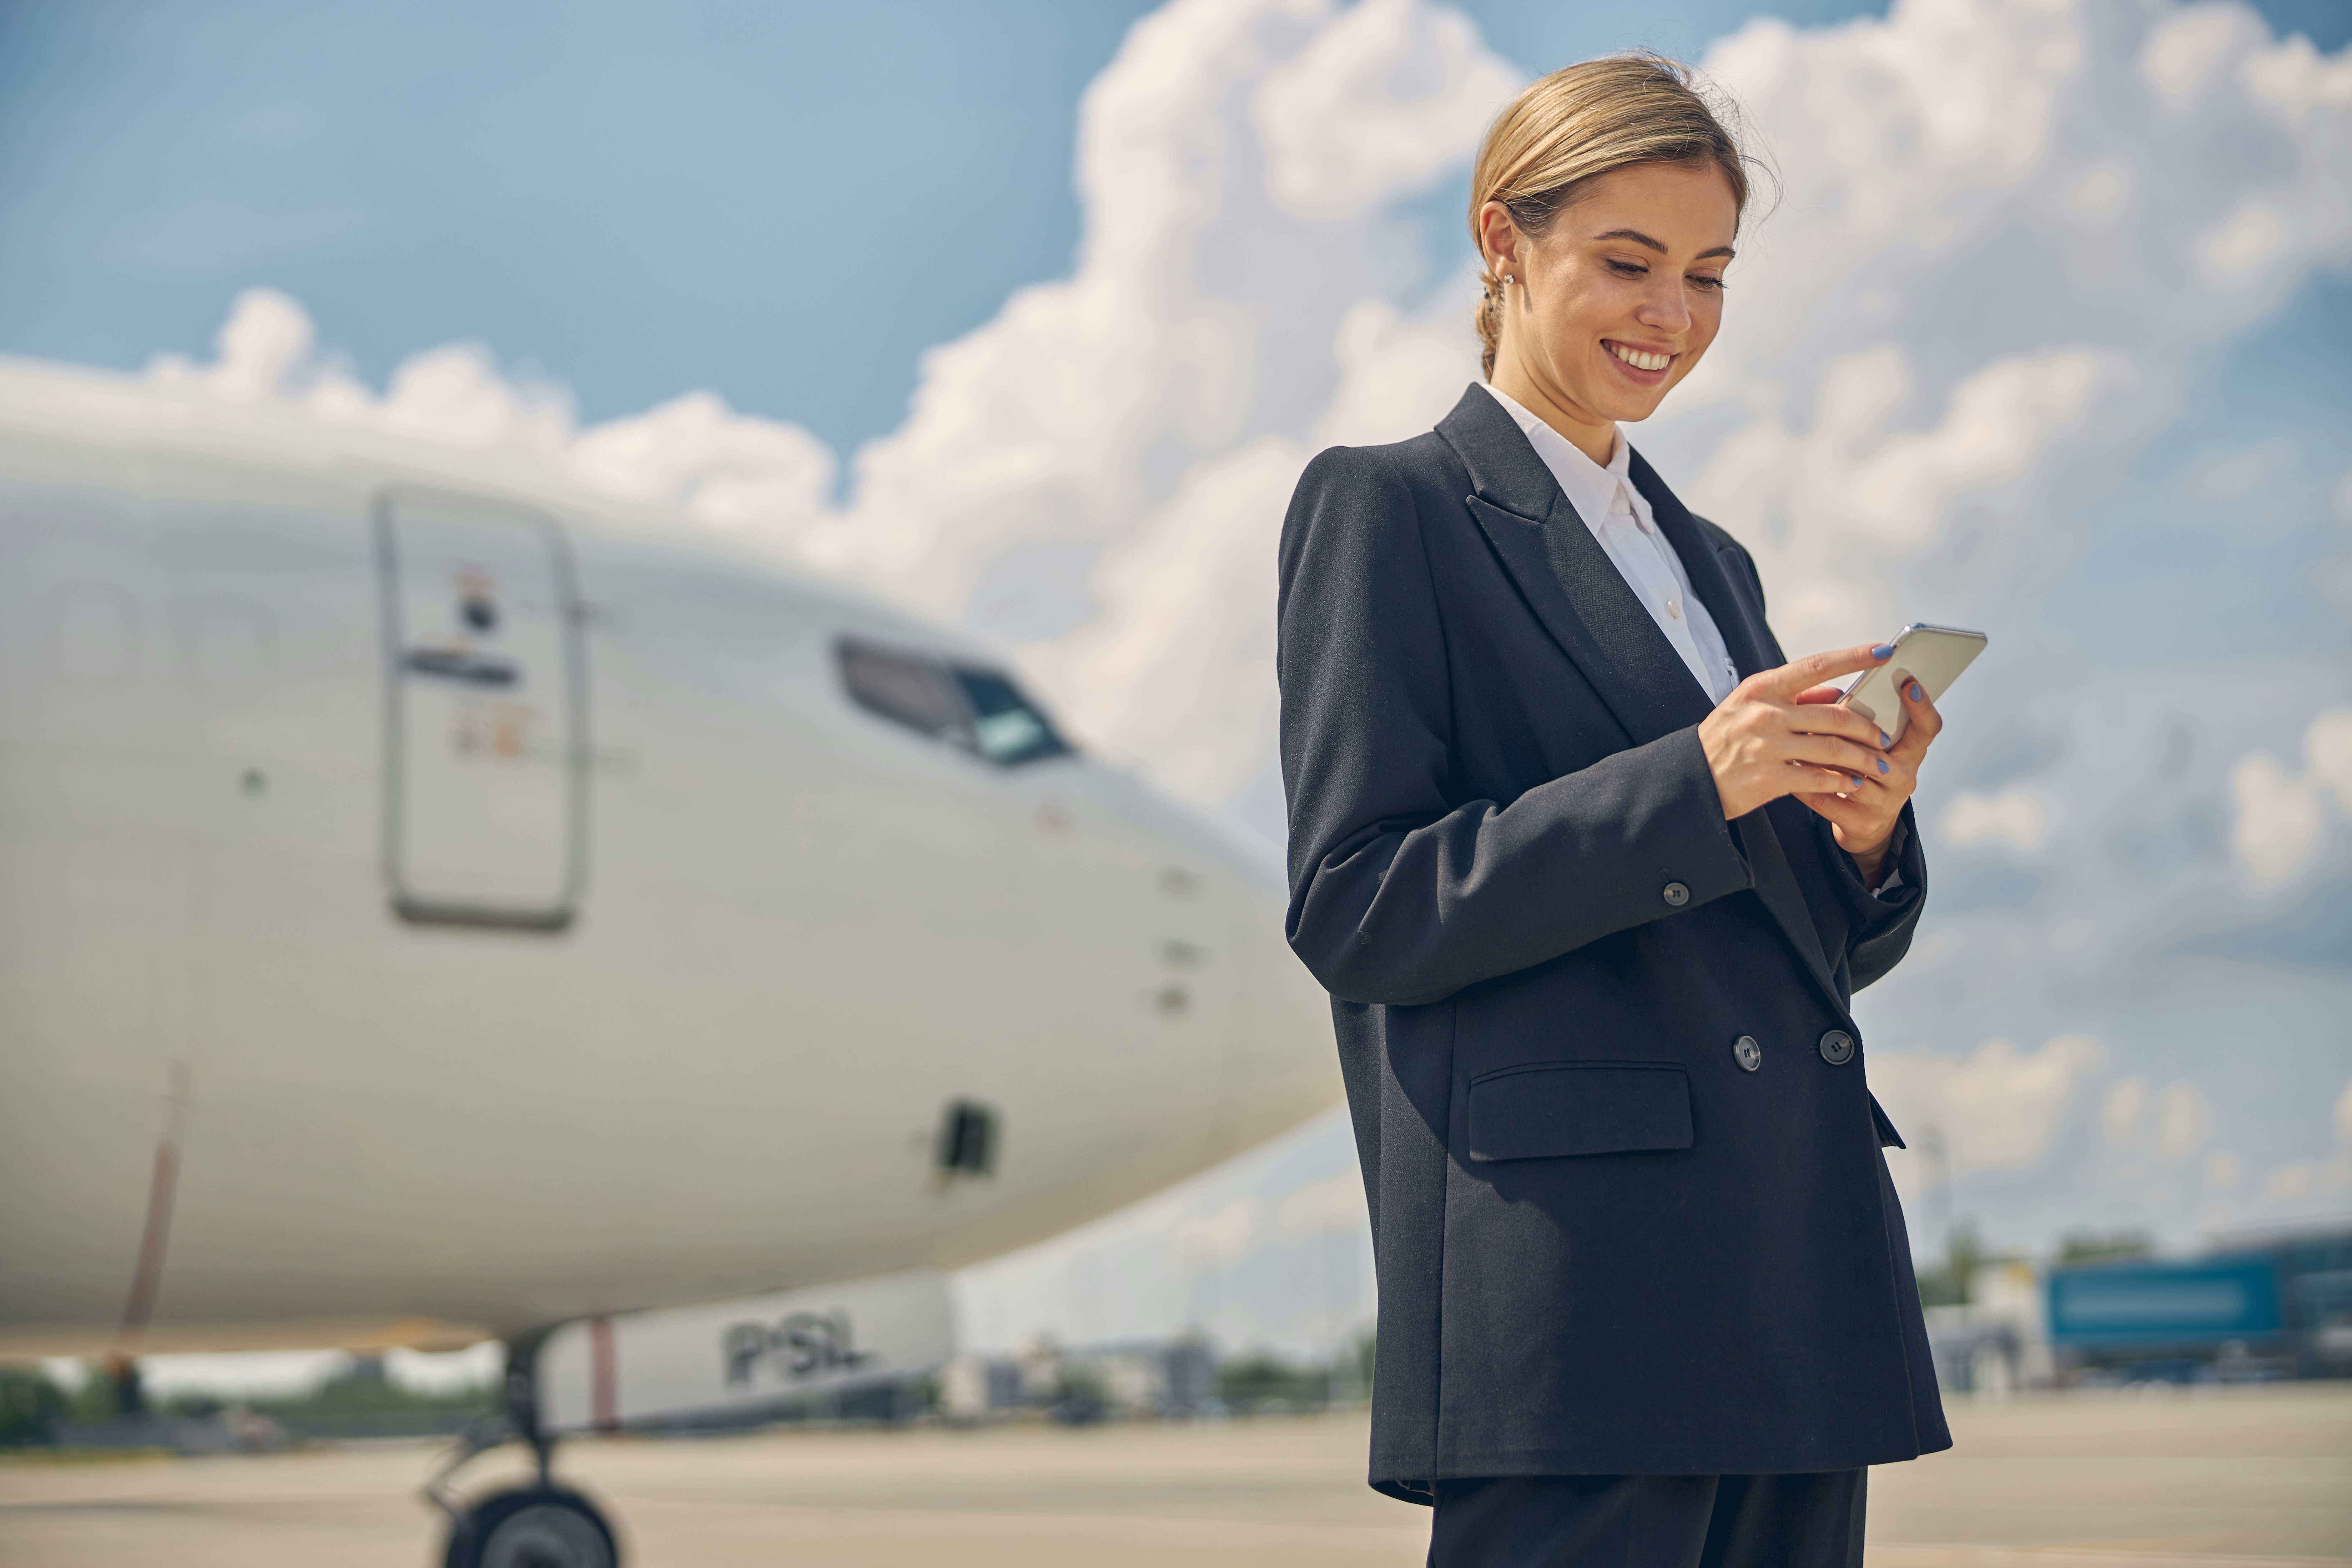 Blog: How airline marketers can be more relevant with hyper-personalization